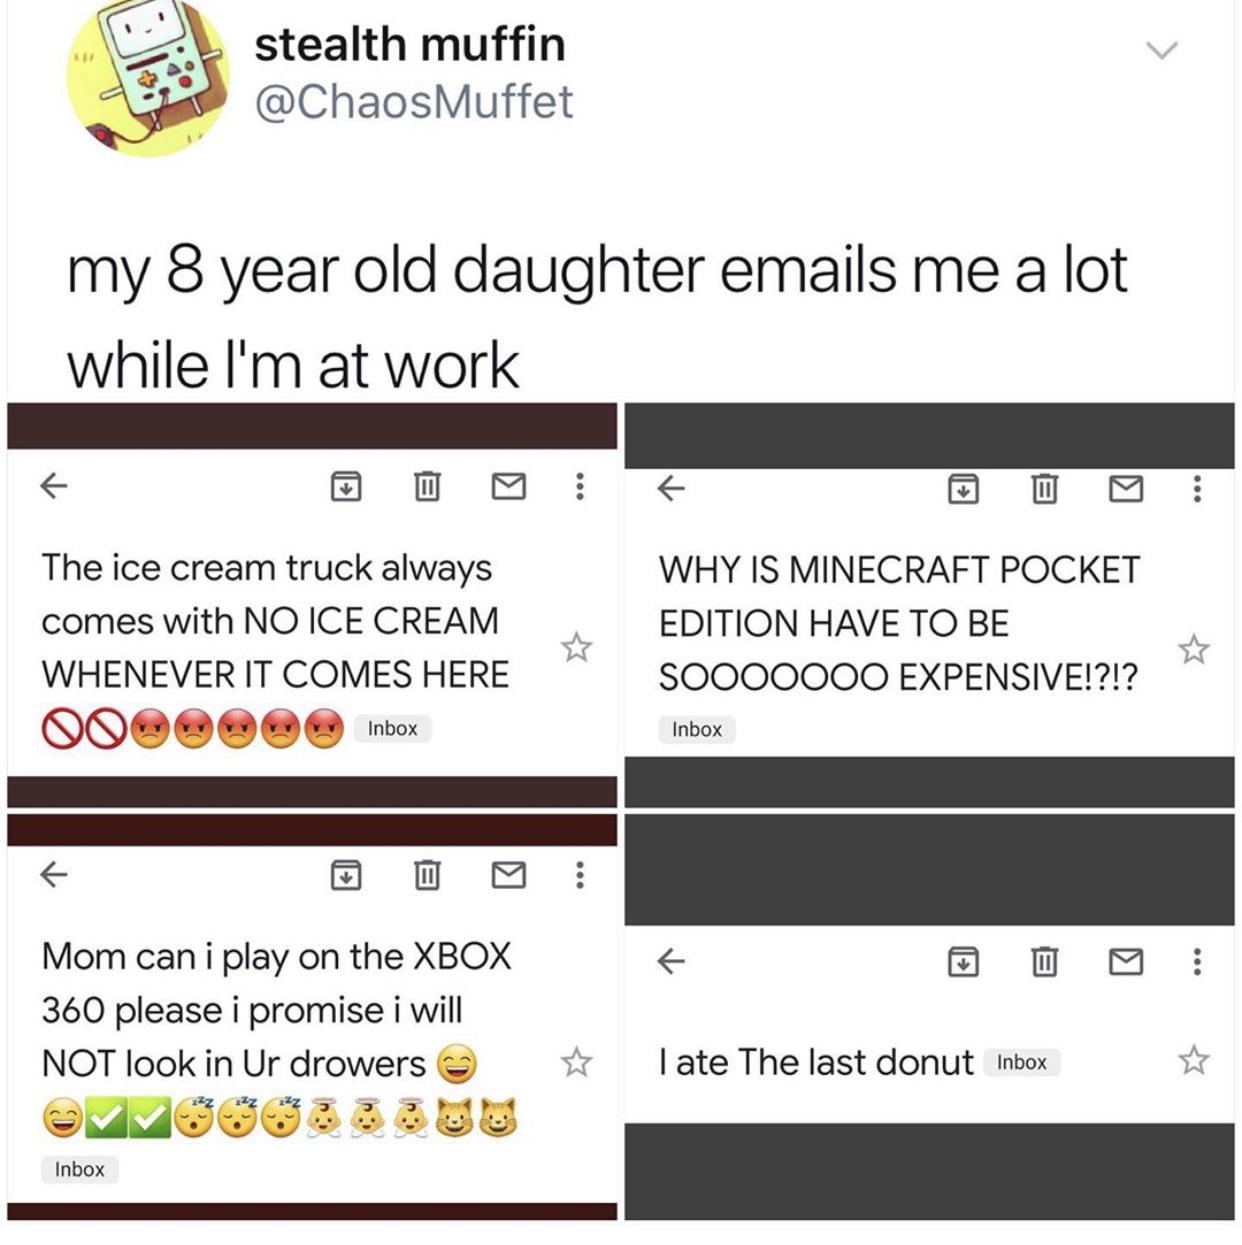 document - stealth muffin my 8 year old daughter emails me a lot while I'm at work The ice cream truck always comes with No Ice Cream Whenever It Comes Here Ooo Inbox Why Is Minecraft Pocket Edition Have To Be SOO00000 Expensive!?!? Inbox p Mom can i play